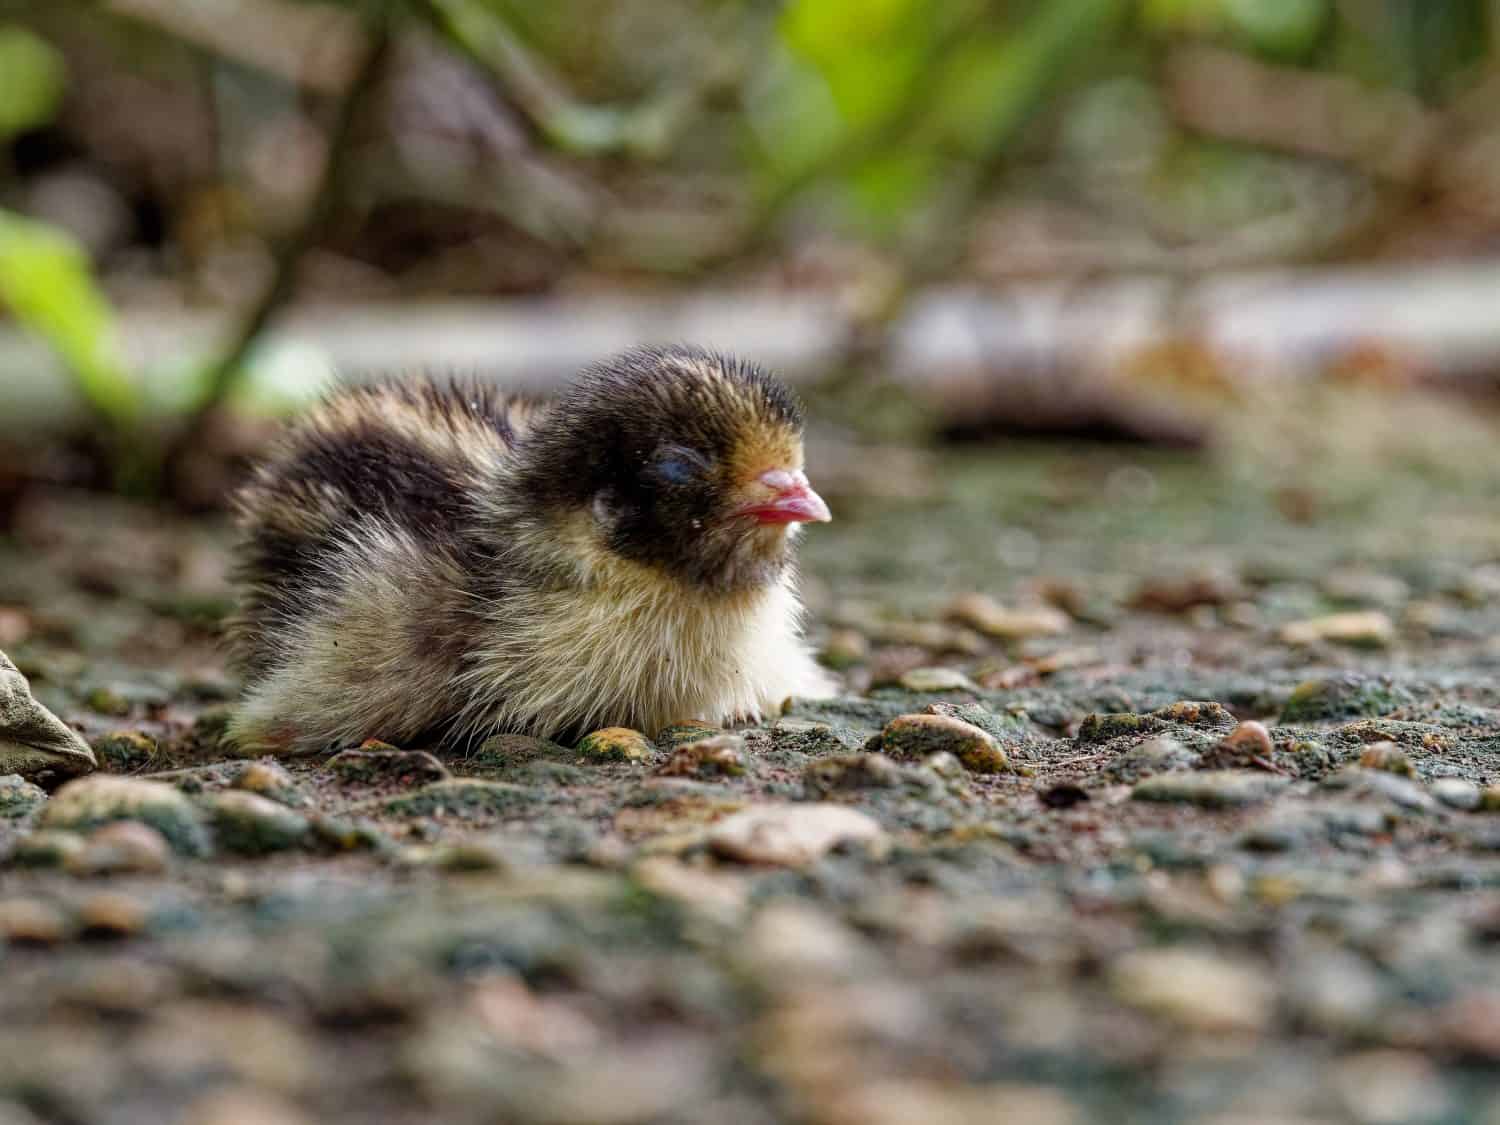 baby quail lost on the ground